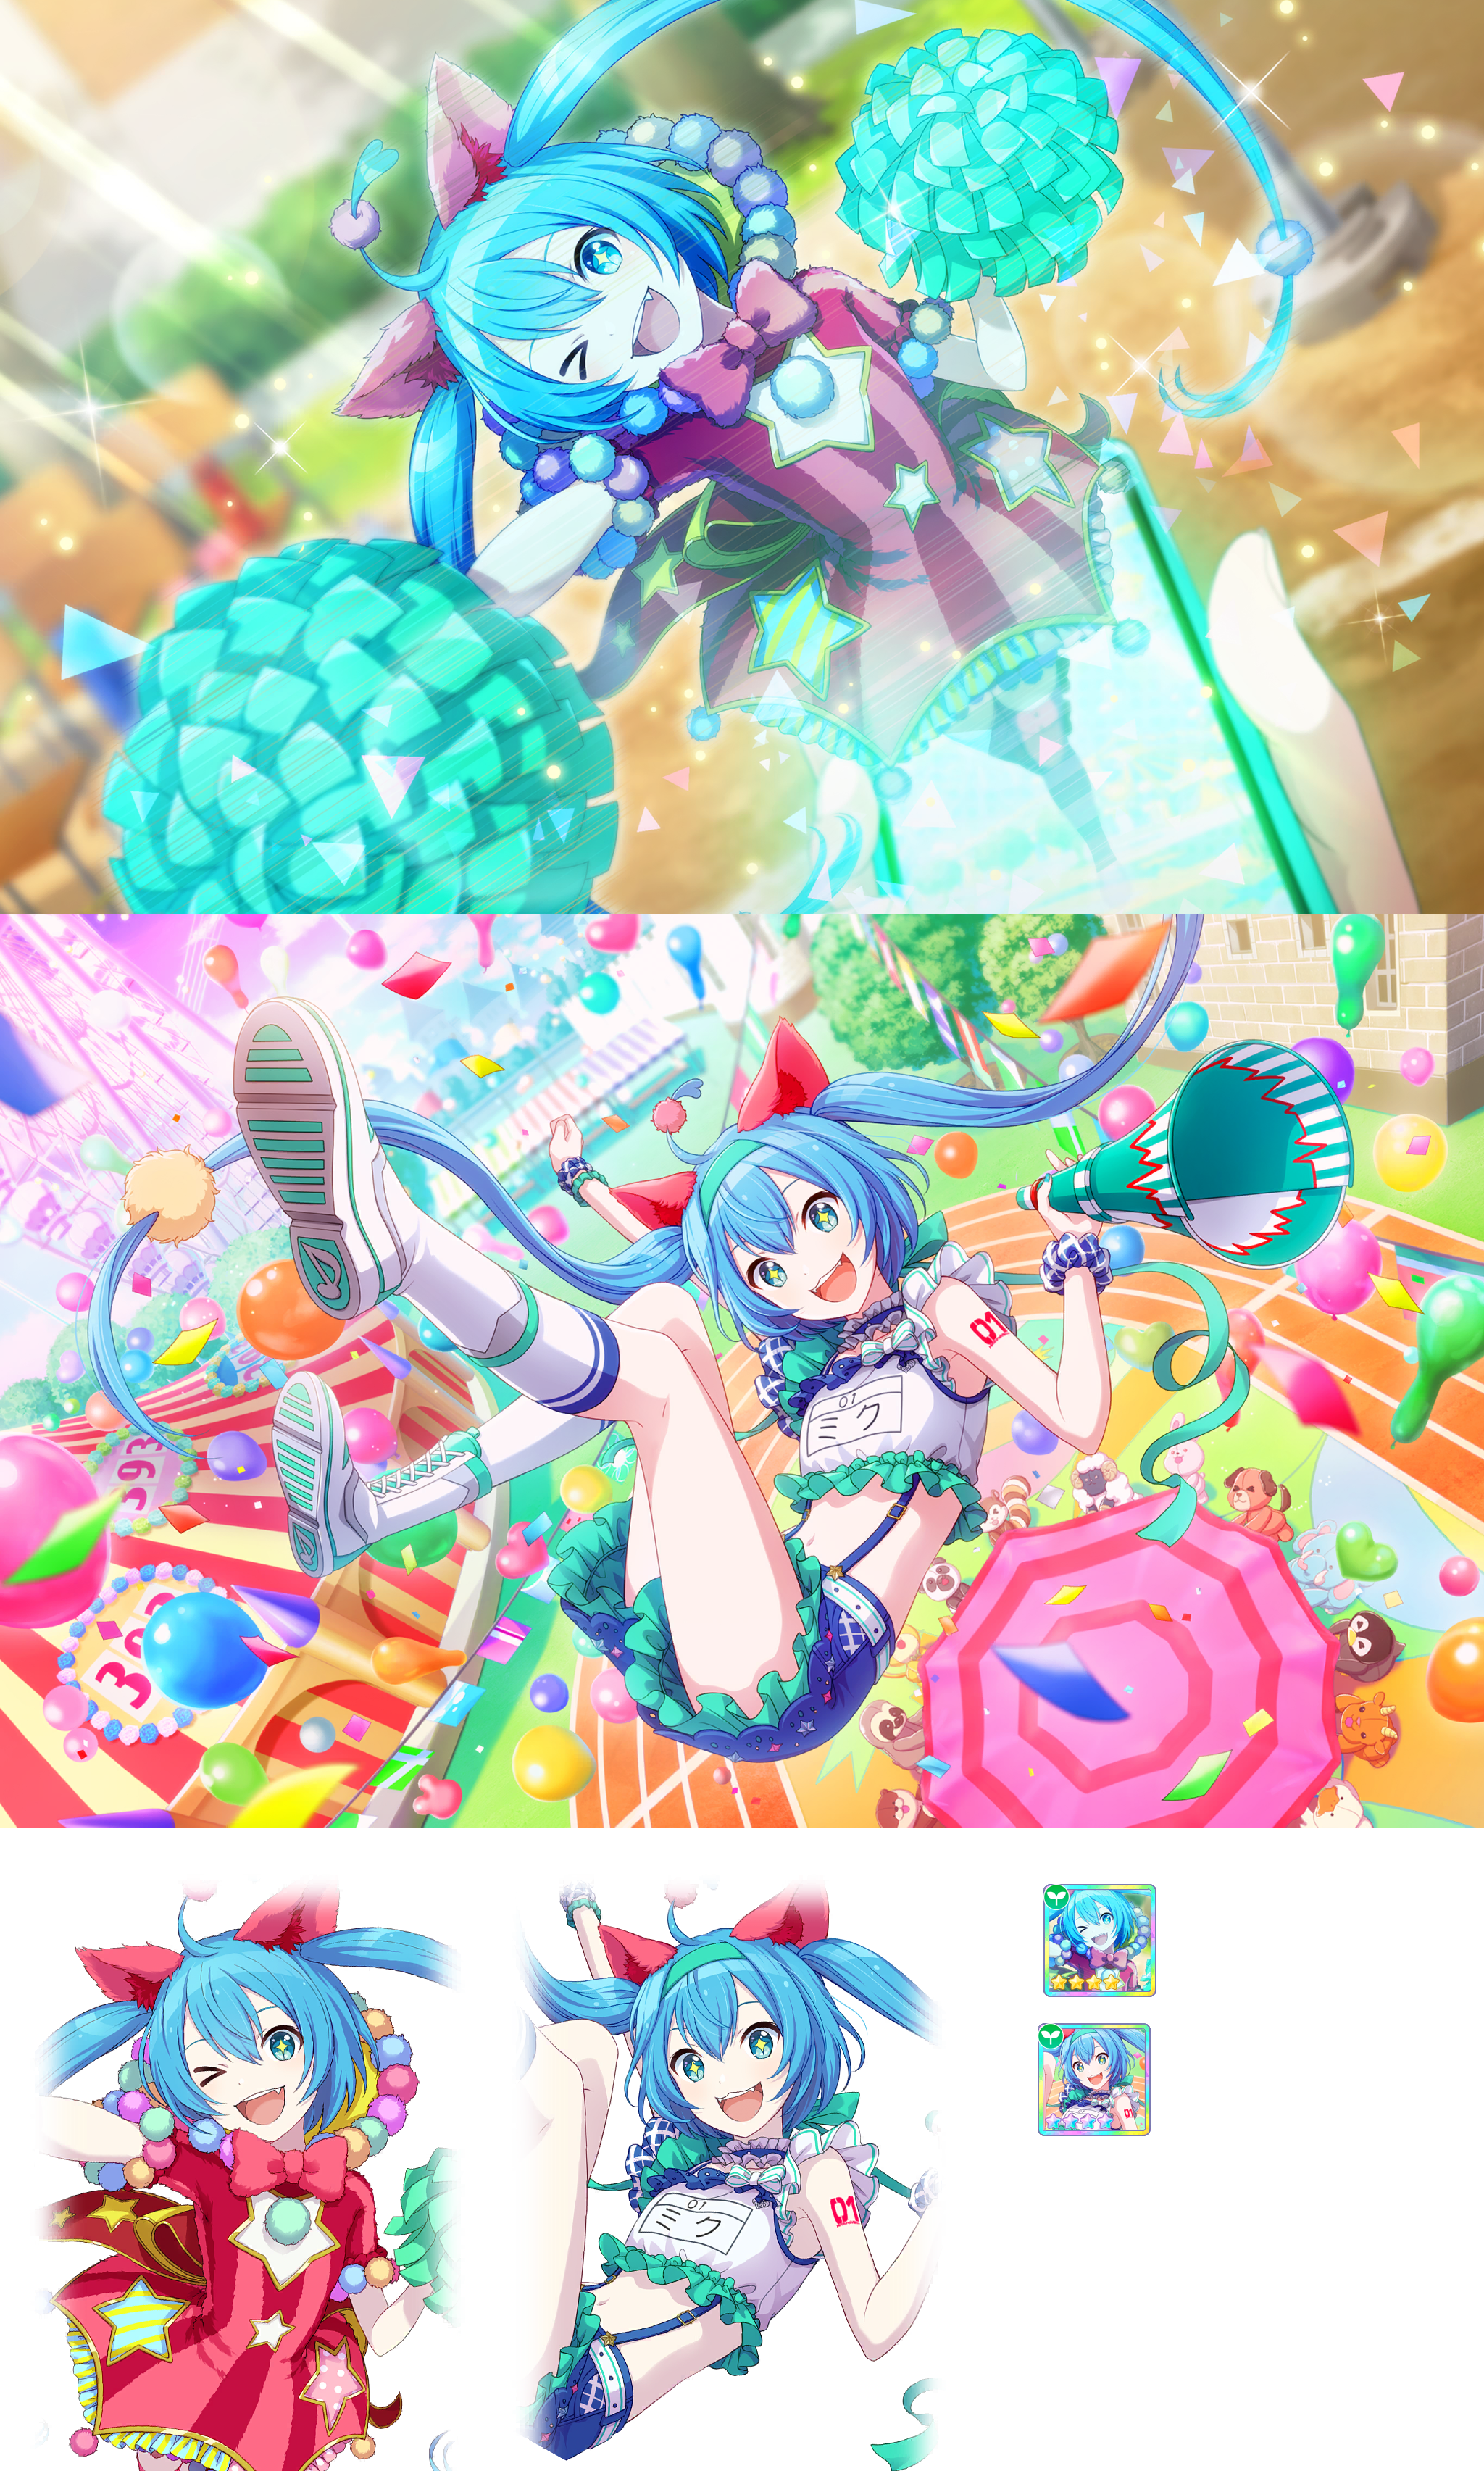 Project SEKAI COLORFUL STAGE! feat. Hatsune Miku - Time To Cheer!